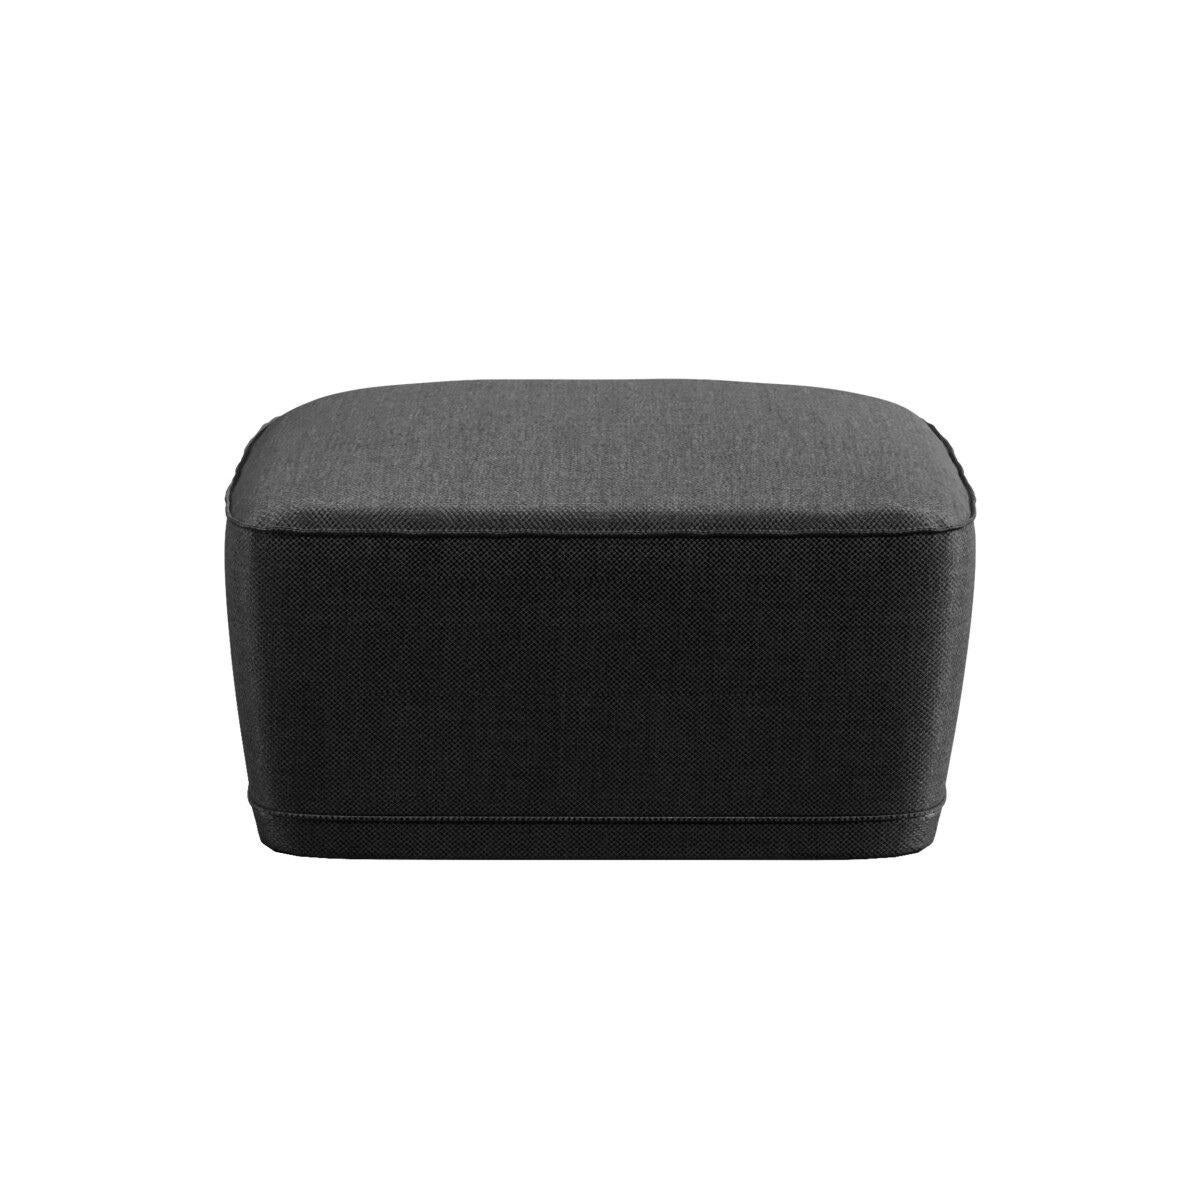 Portuguese Waterproof Outdoor Pouf in Black Fabric with Foam For Sale